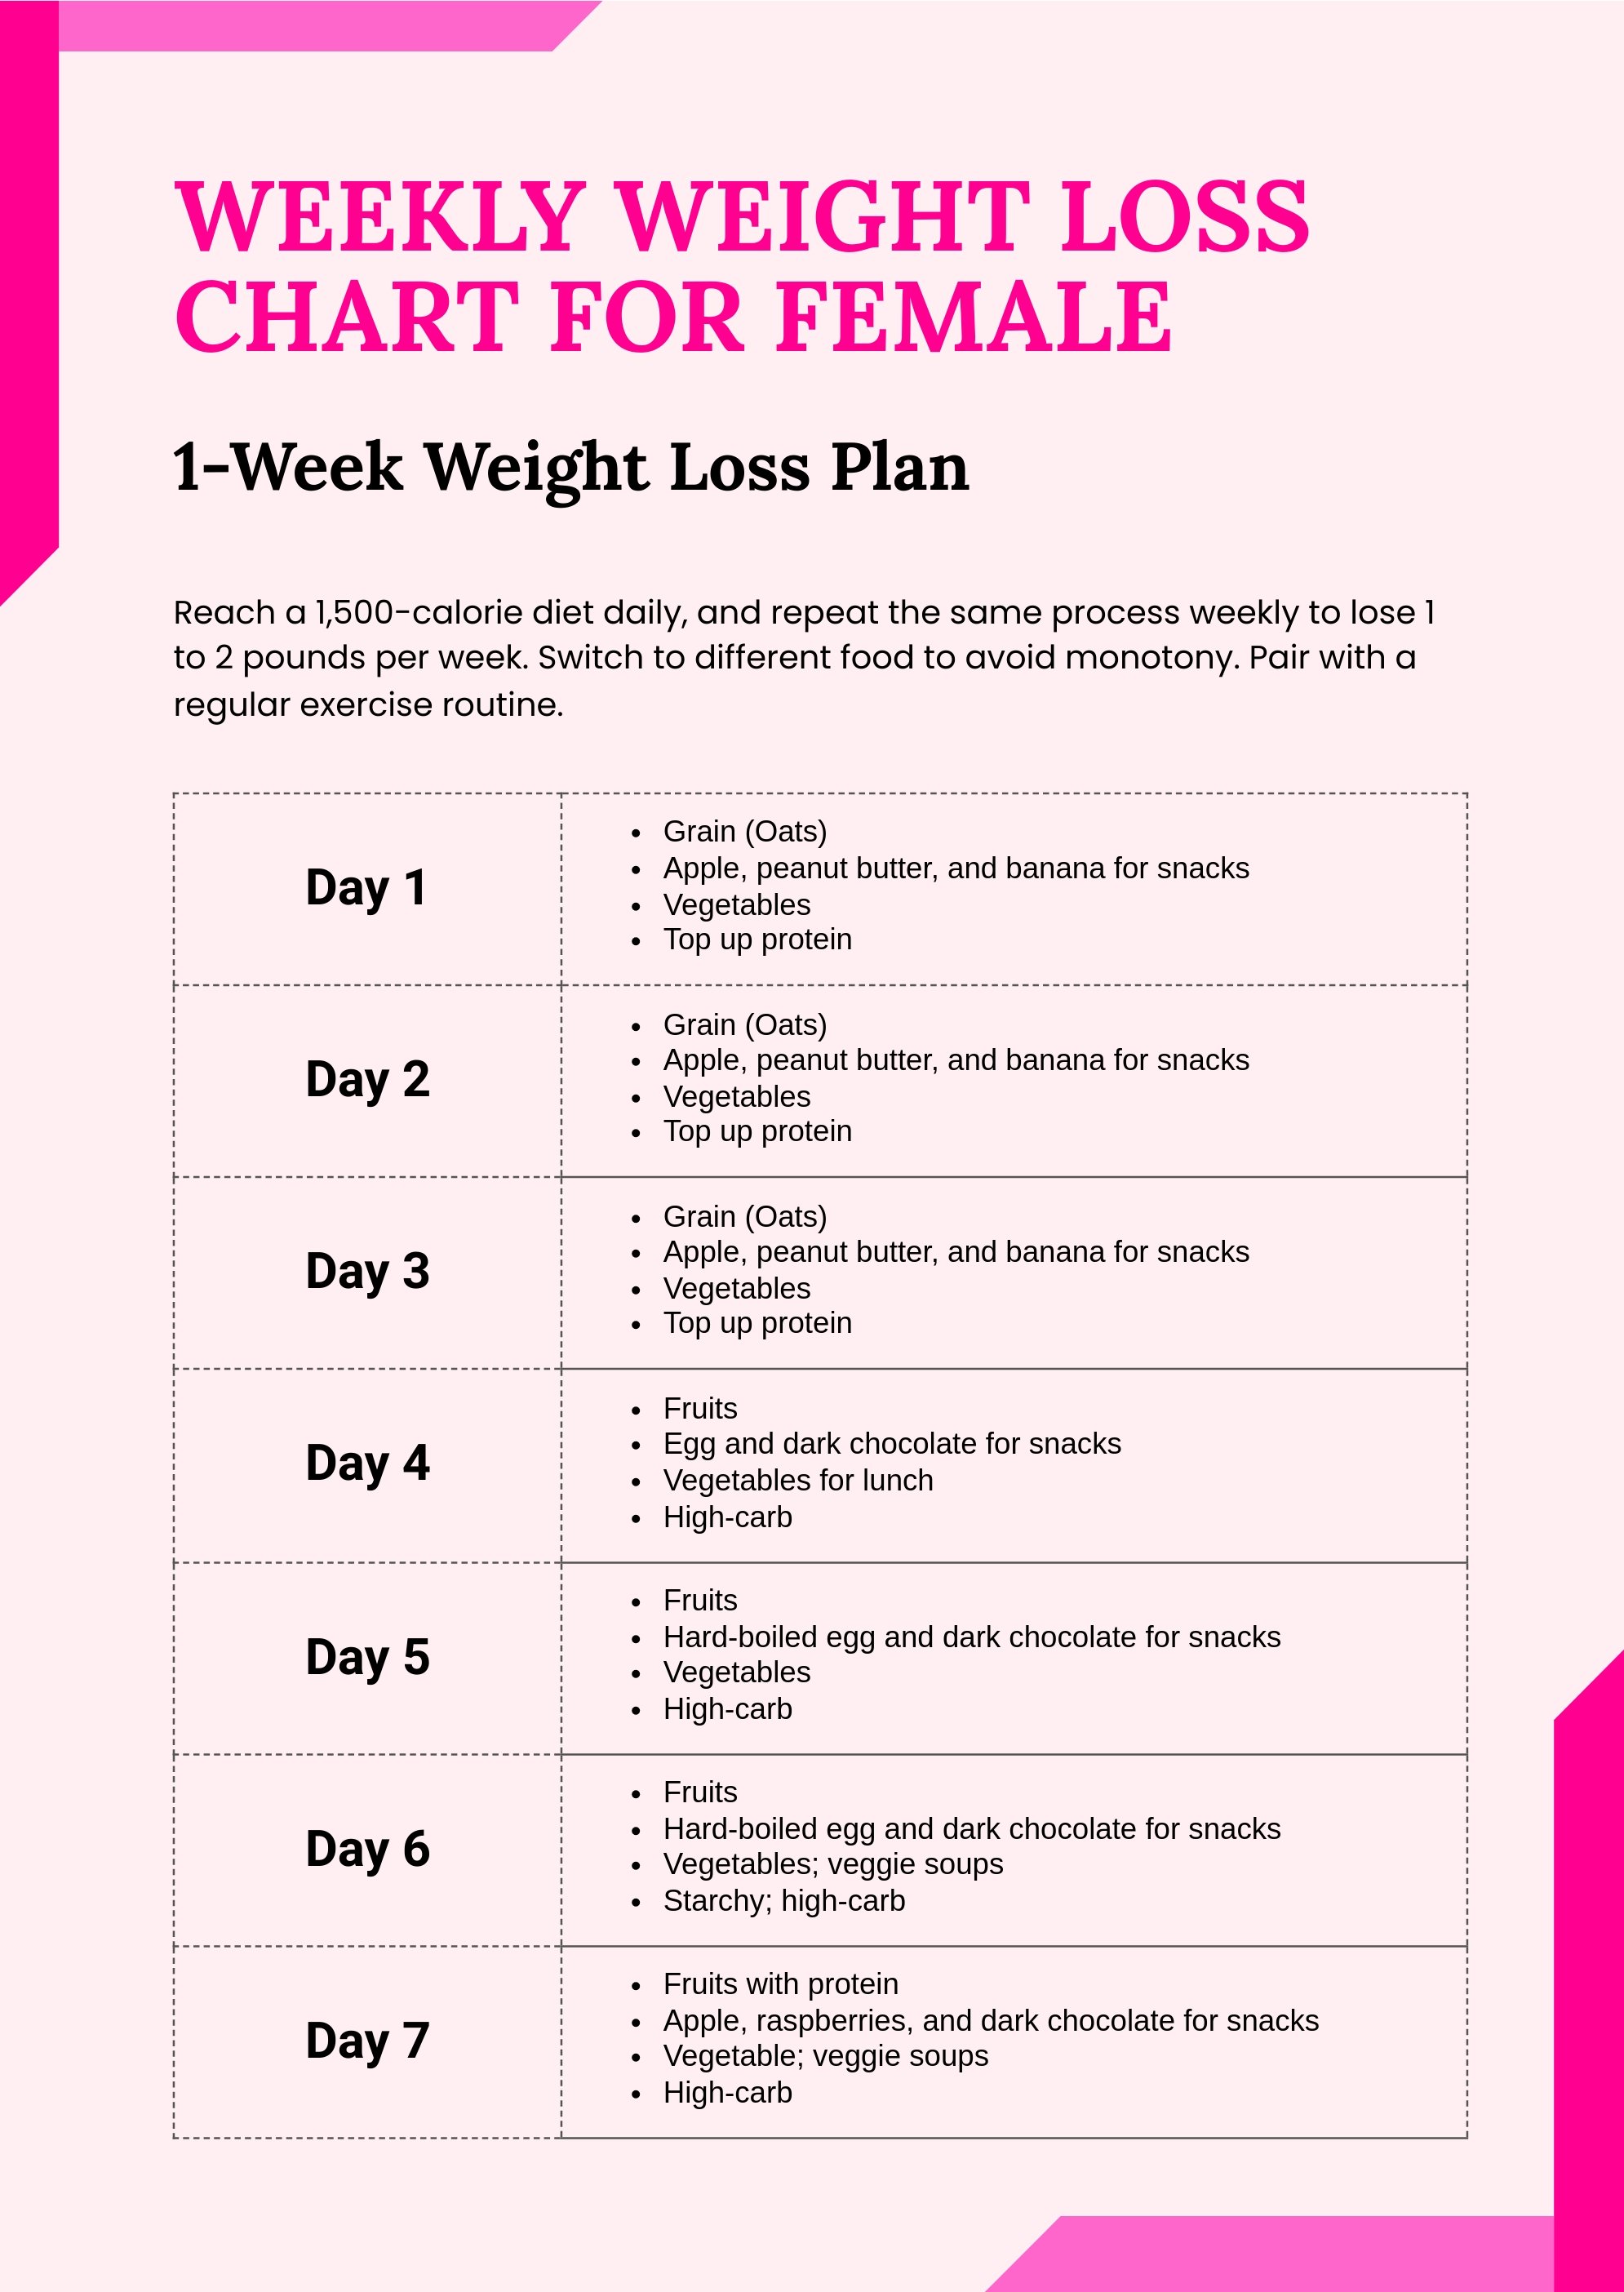 Weekly Weight Loss Chart For Female in Illustrator, PDF Download